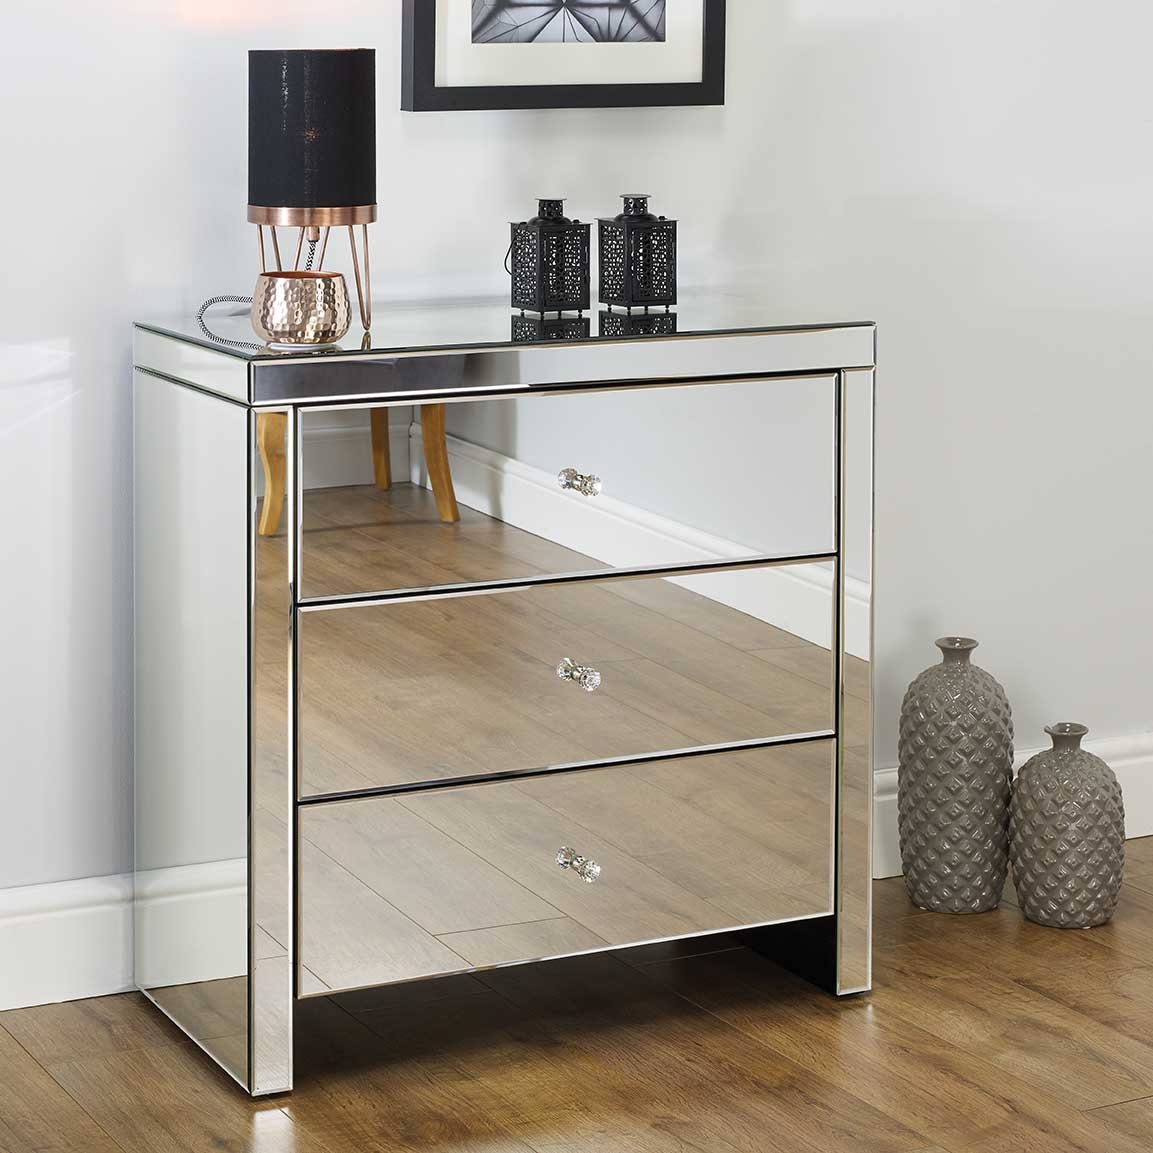 mirrored furniture wholesale tallboy chest 5 drawer living room cabinets